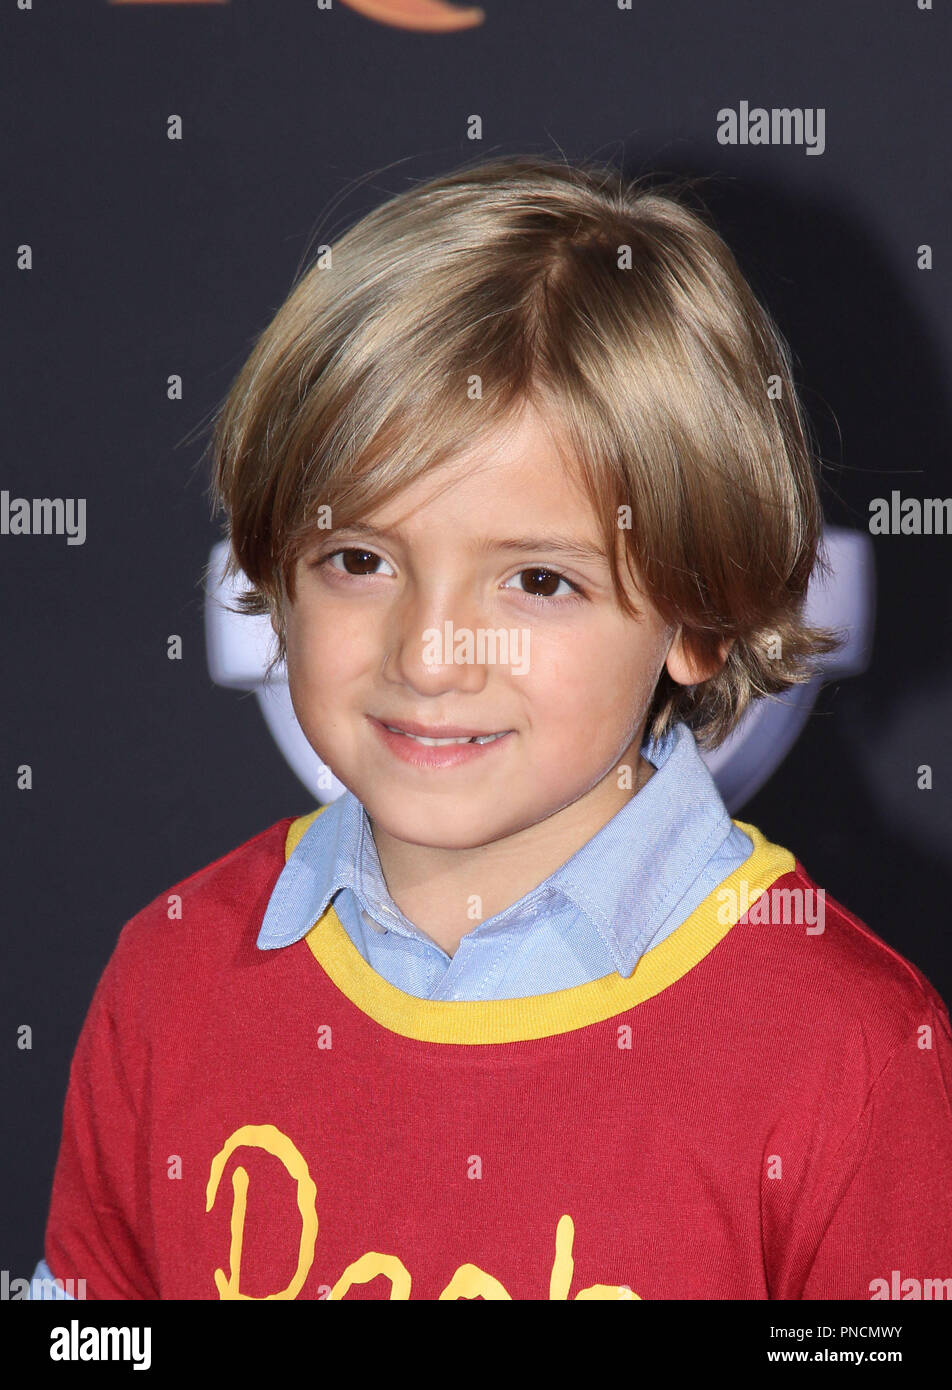 Jeremy Maguire at Disney's World Premiere of 'Christopher Robin'. Held at Walt Disney Studios Main Theater in Burbank, CA, July 30, 2018. Photo by: Richard Chavez / PictureLux Stock Photo